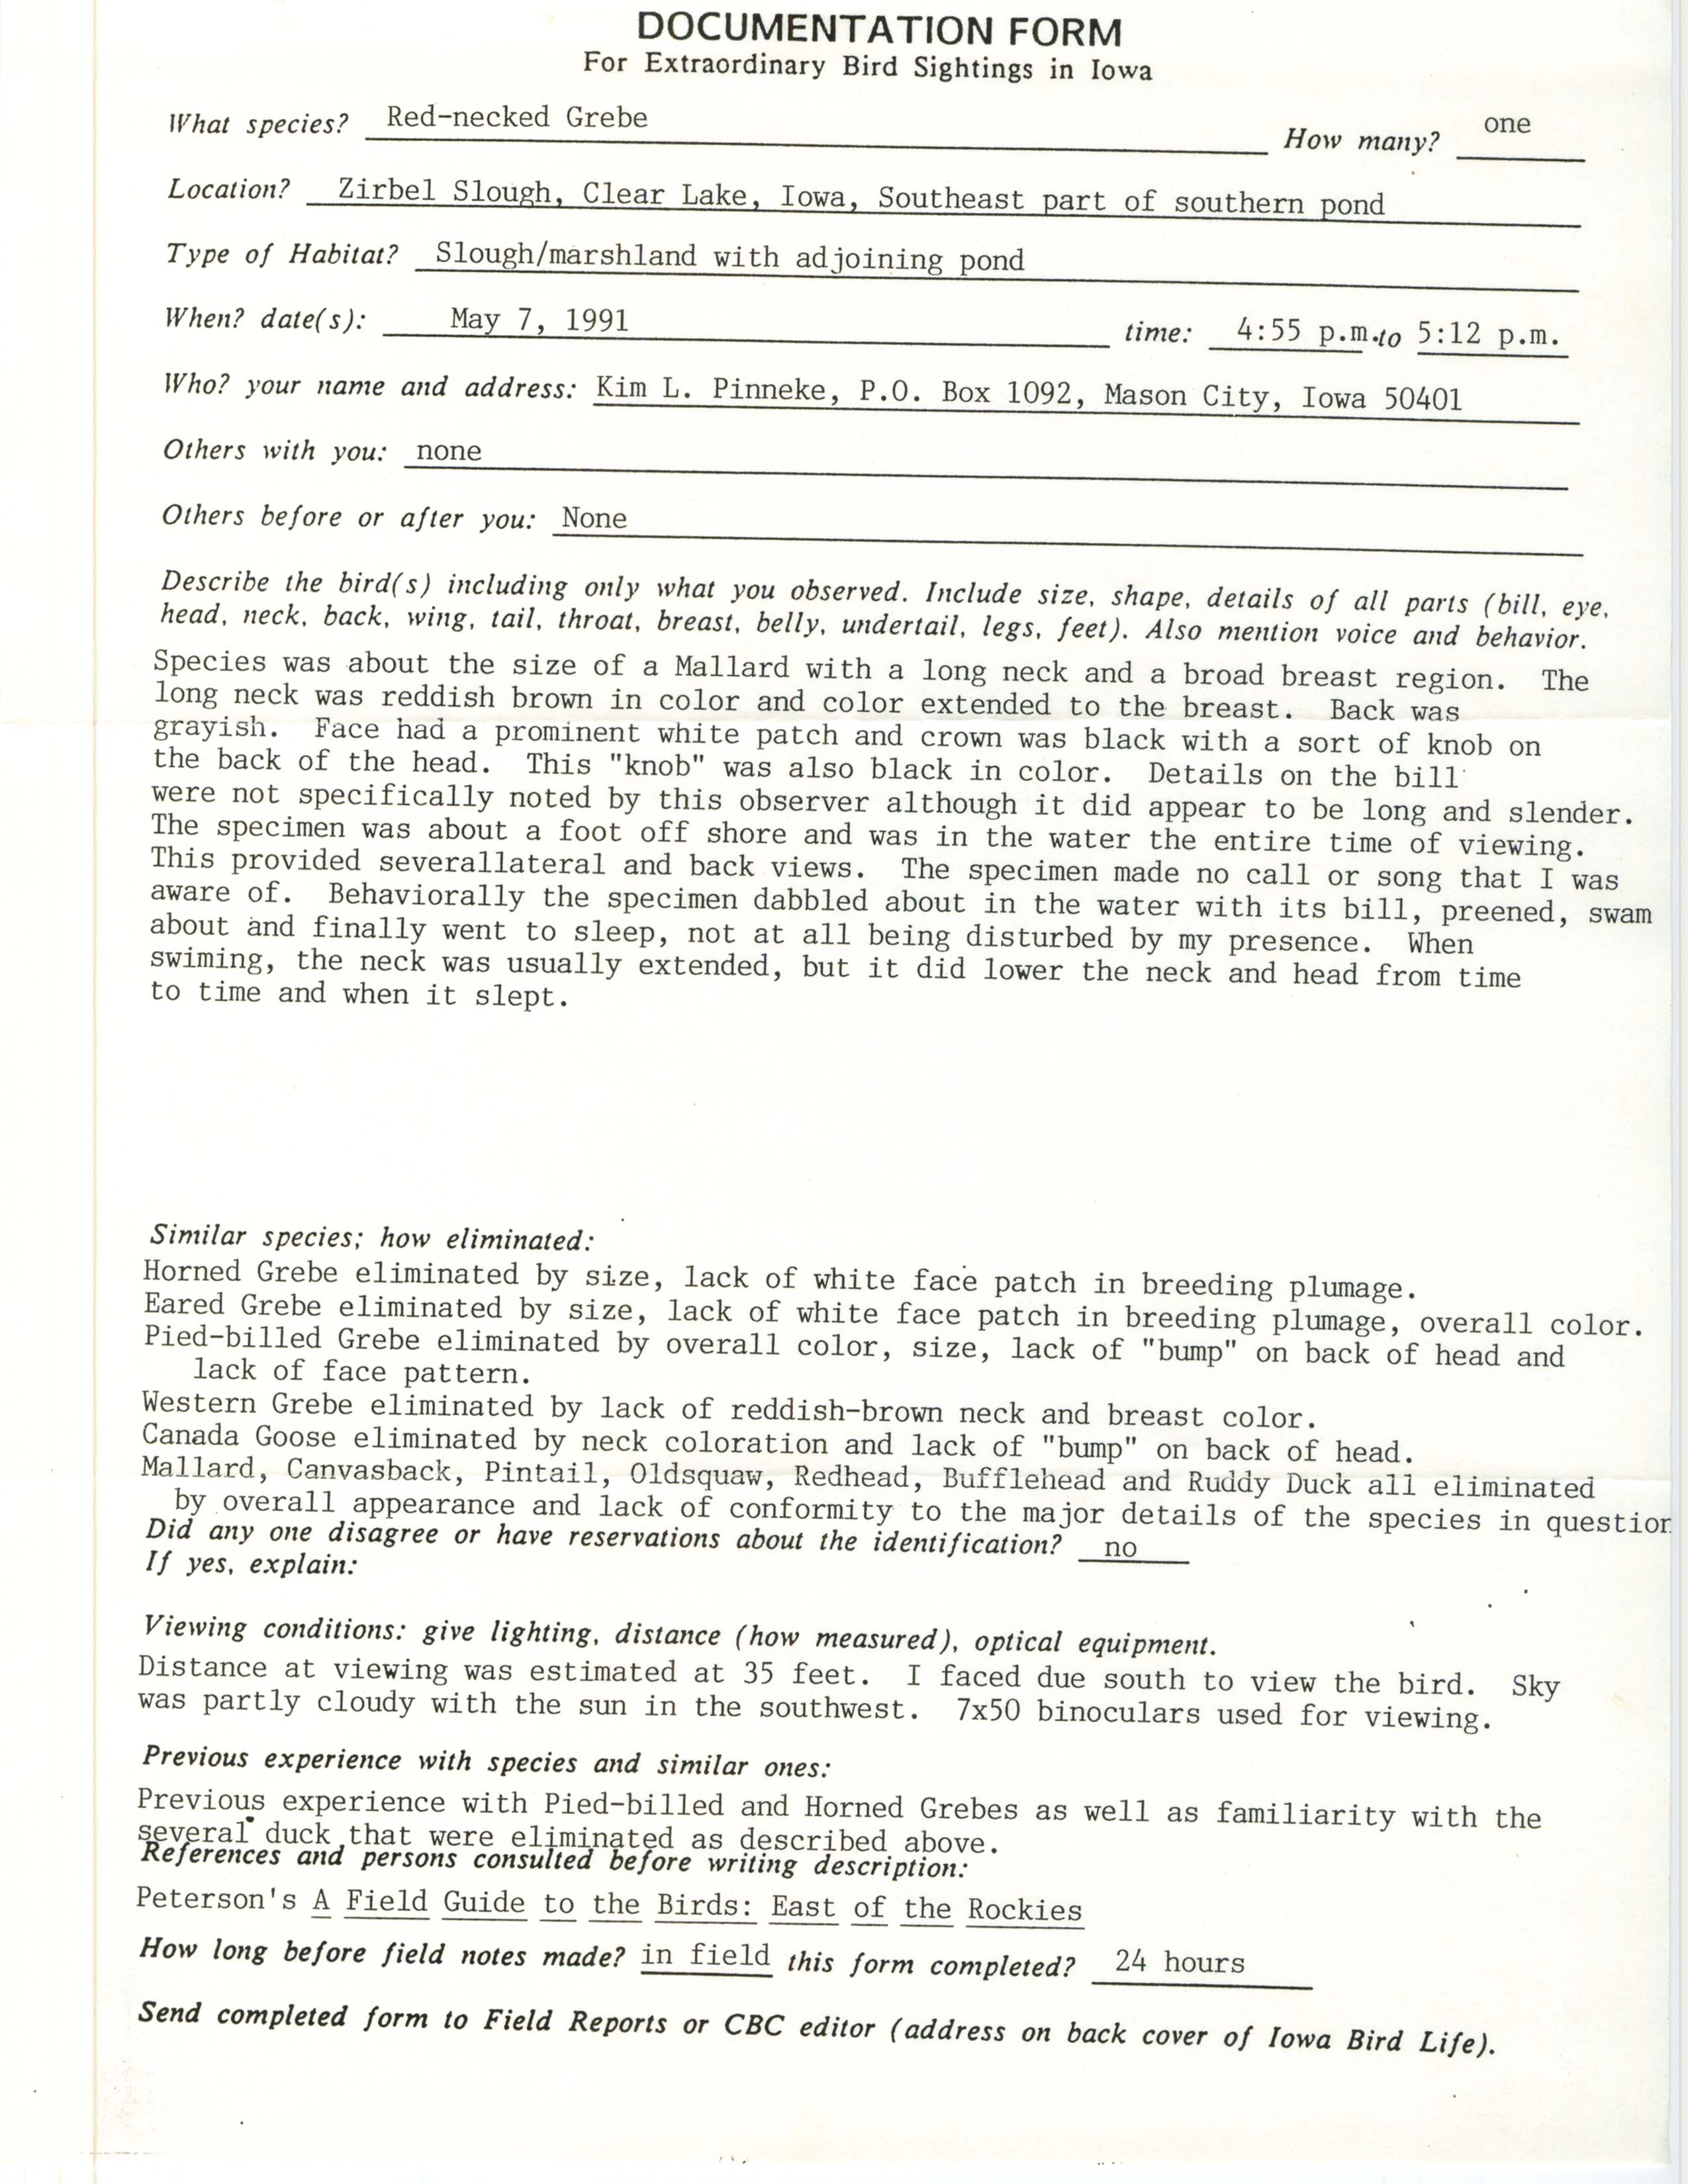 Rare bird documentation form for Red-necked Grebe at Zirbel Slough, 1991